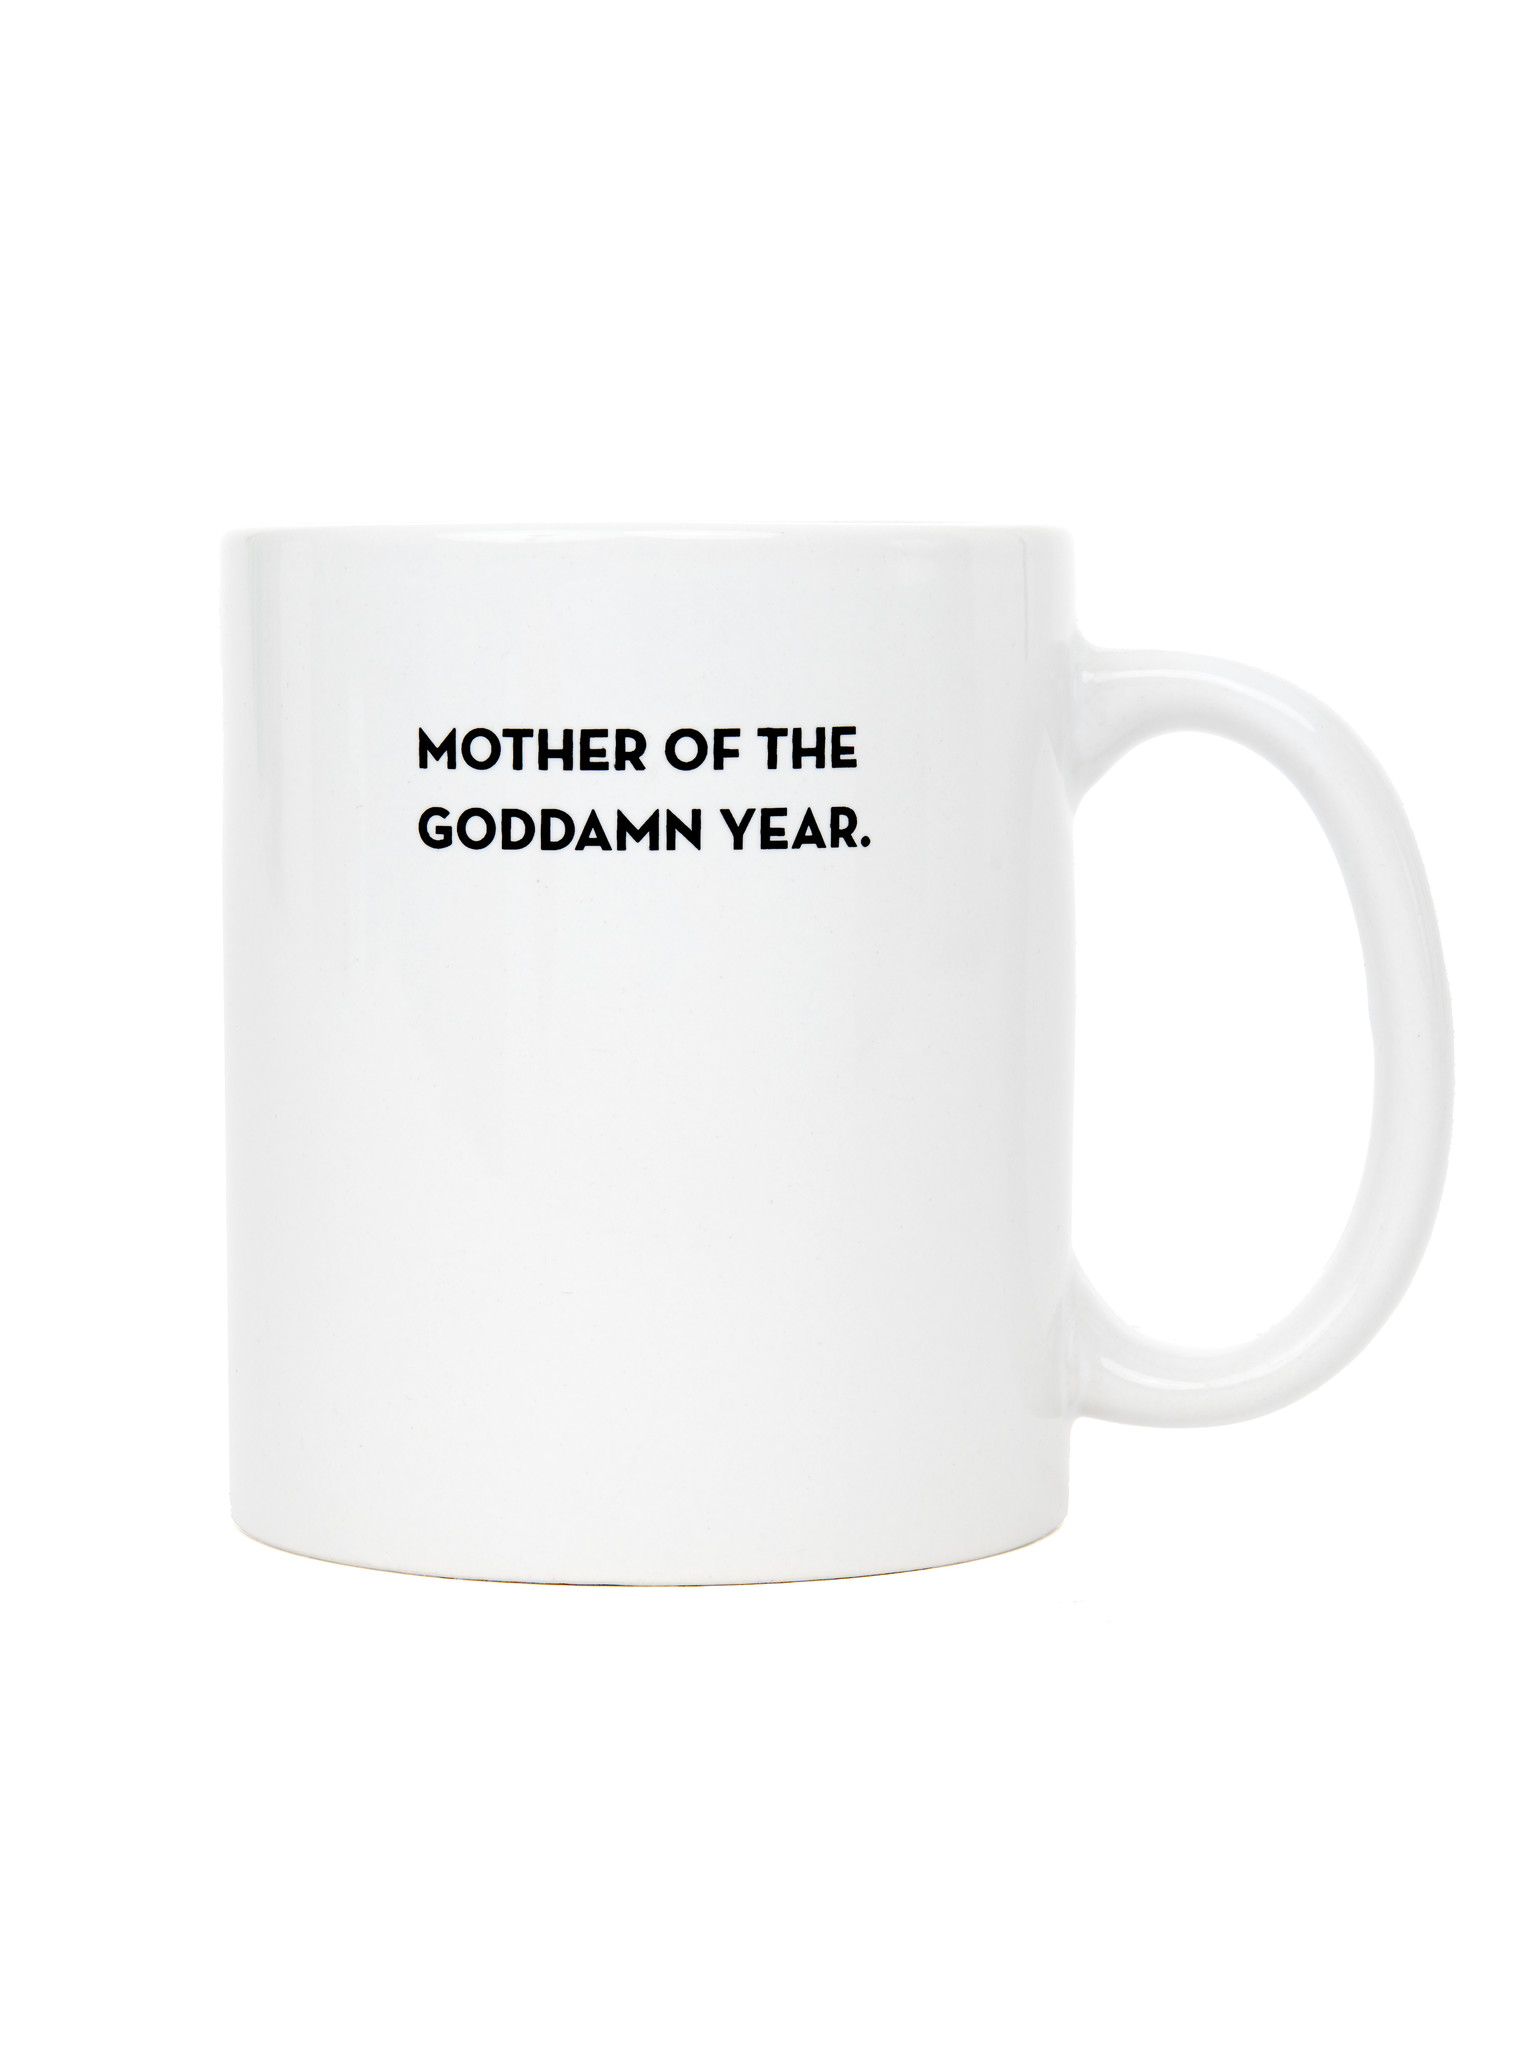 Frances Boutique Mother's Day Gifts Mother of the Year Mug